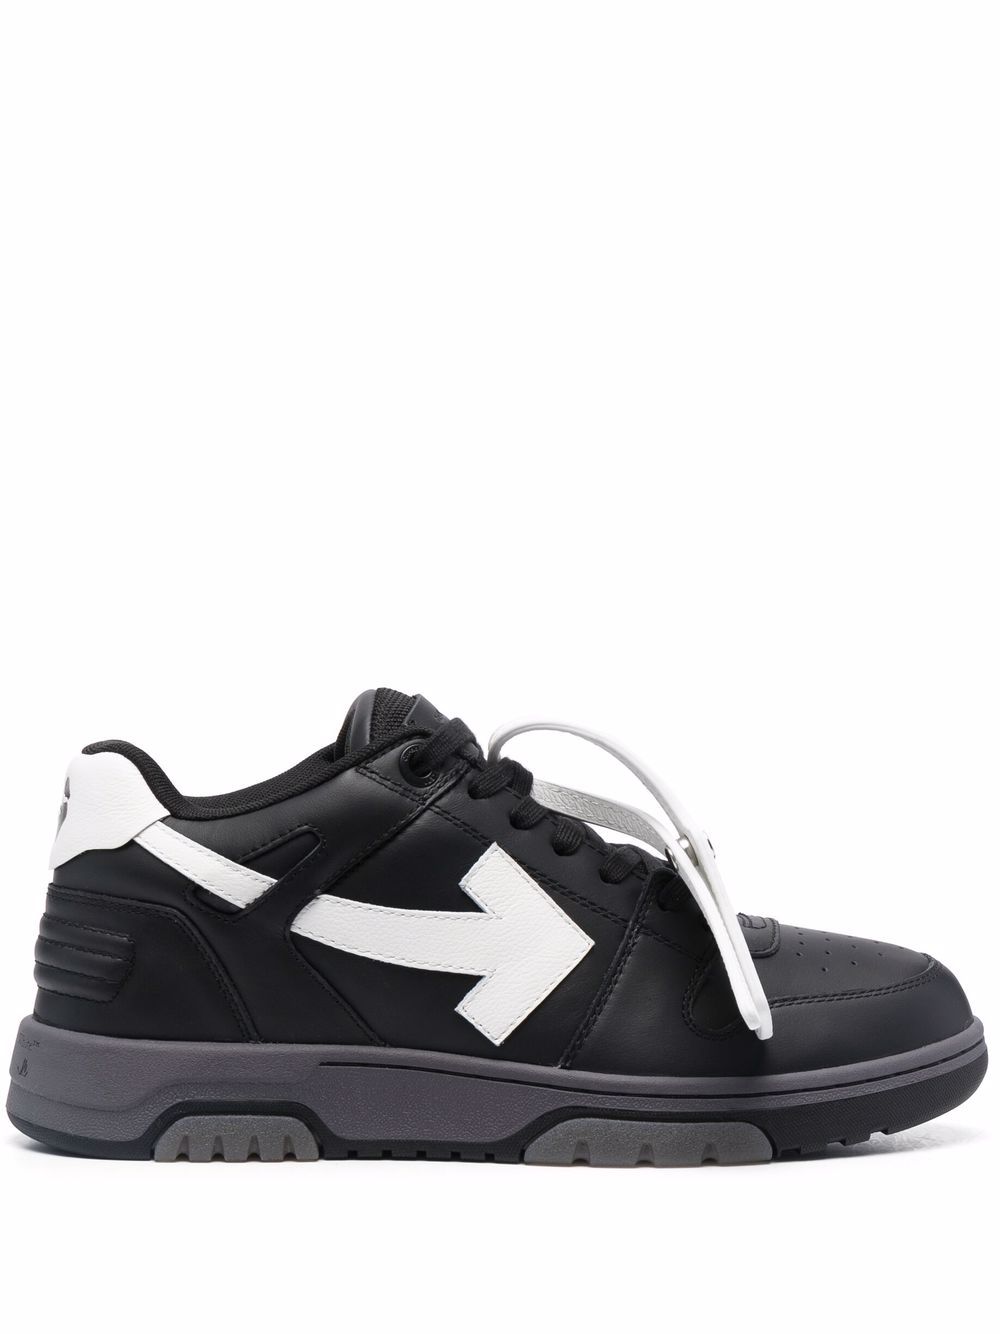 Off-White OOO low-top sneakers - Black von Off-White